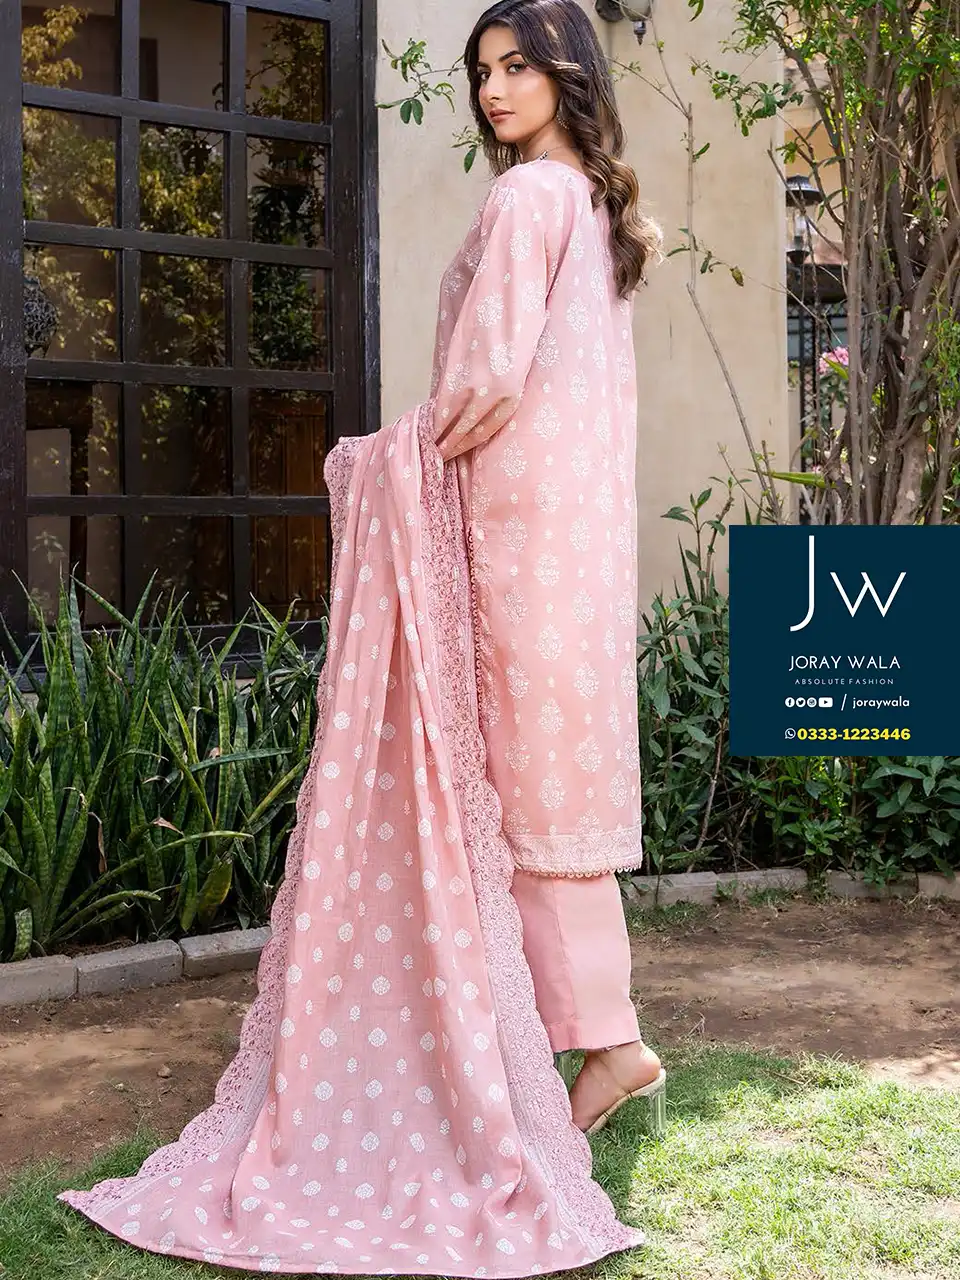 Zesh Cutwork Embroidered Lawn 2024 D4 by Zesh Textile available with free delivery at joraywala